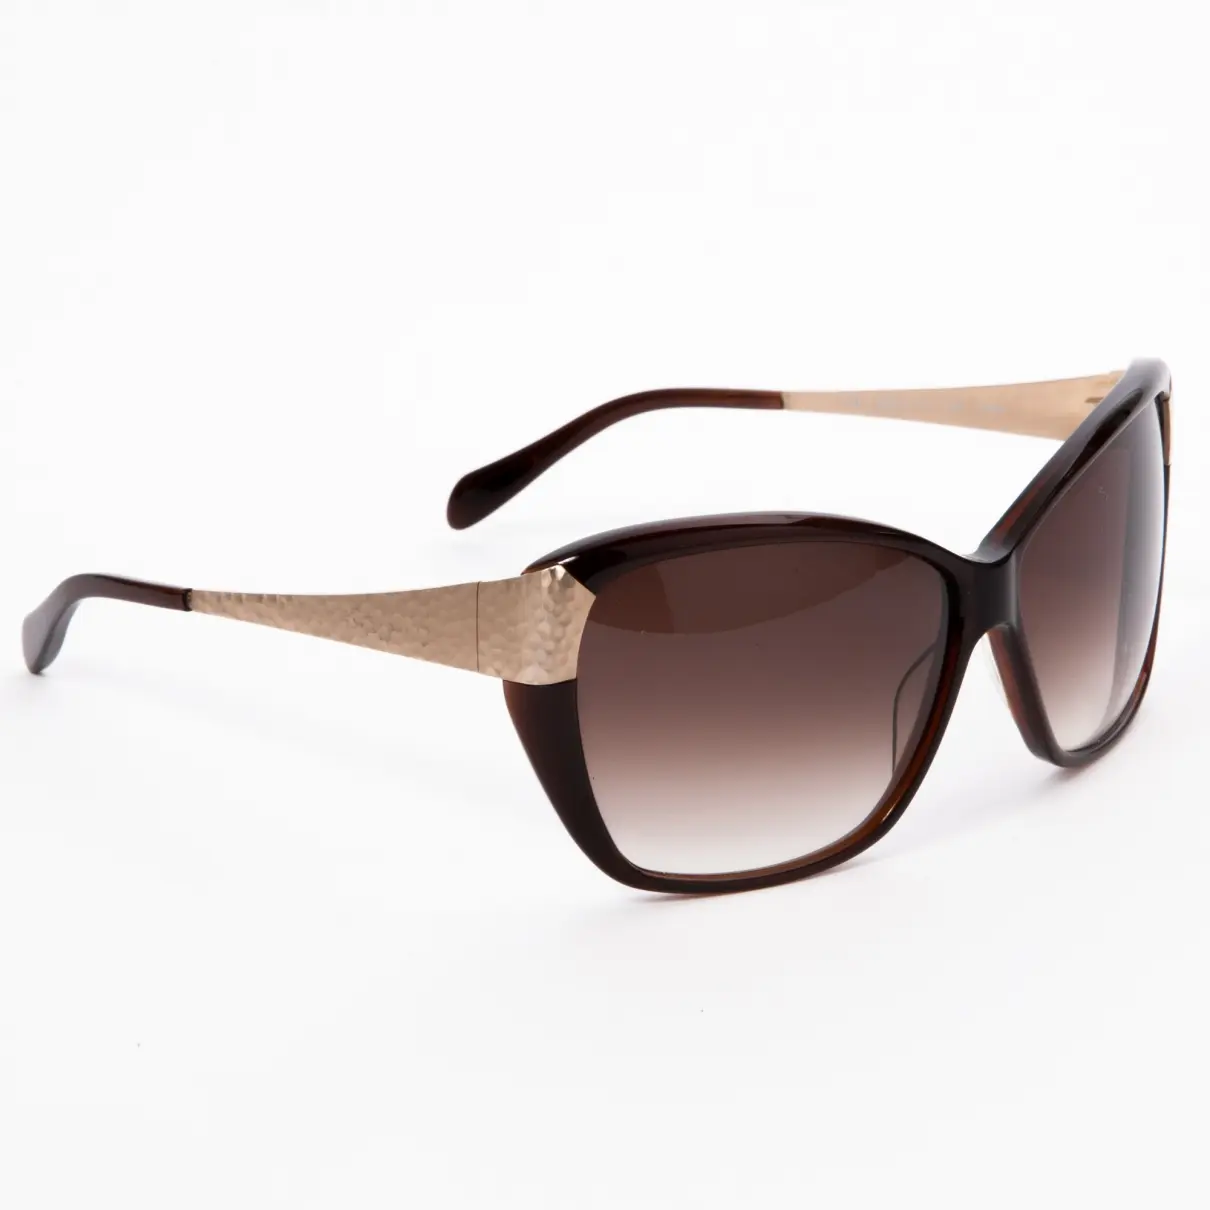 Oliver Peoples Sunglasses for sale